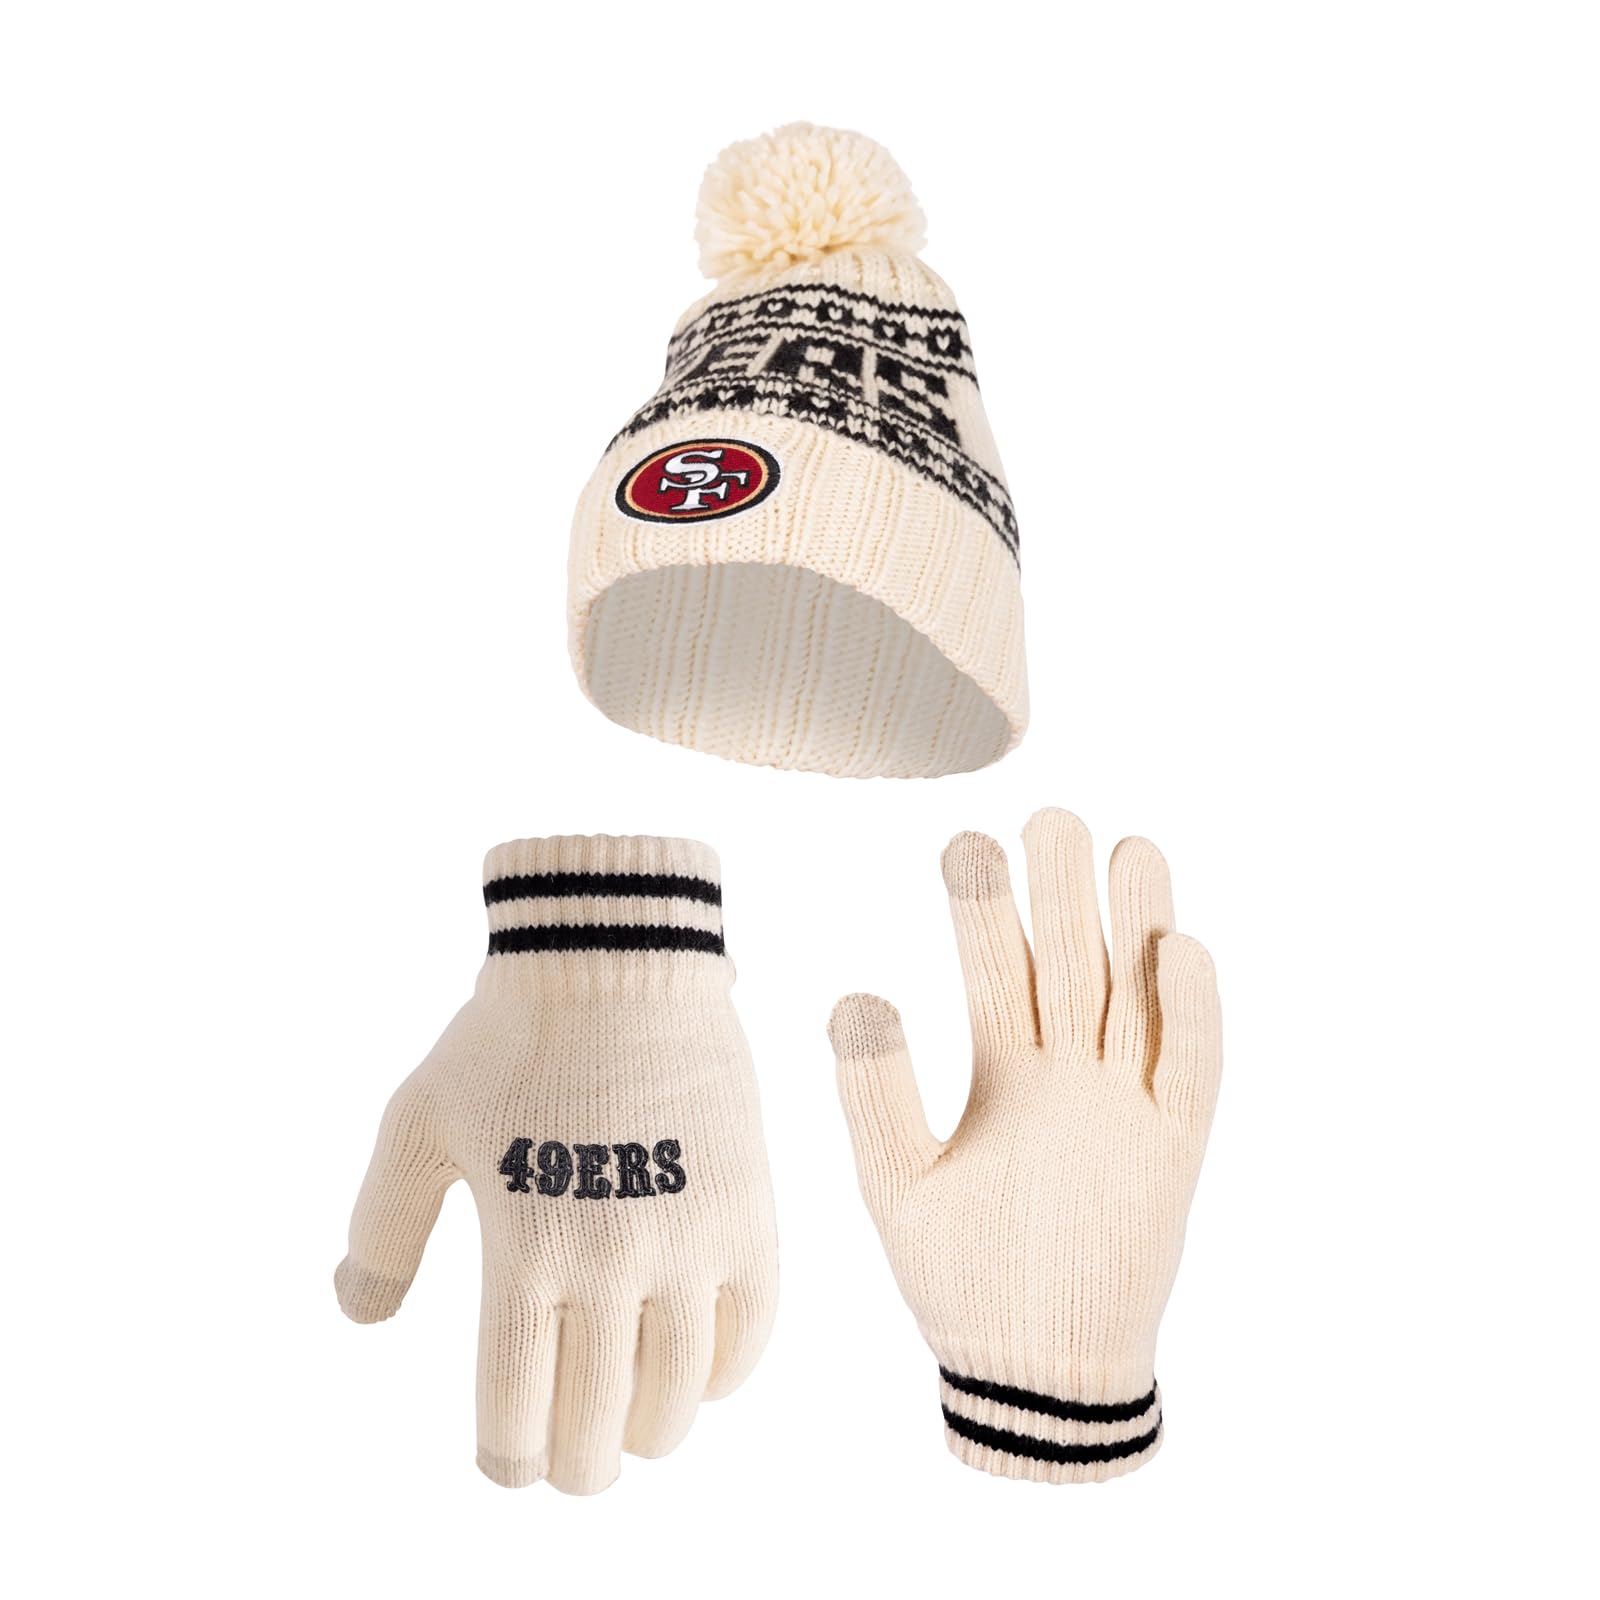 Ultra Game NFL San Francisco 49ers Womens Super Soft Cable Knit Winter Beanie Knit Hat with Extra Warm Touch Screen Gloves|San Francisco 49ers